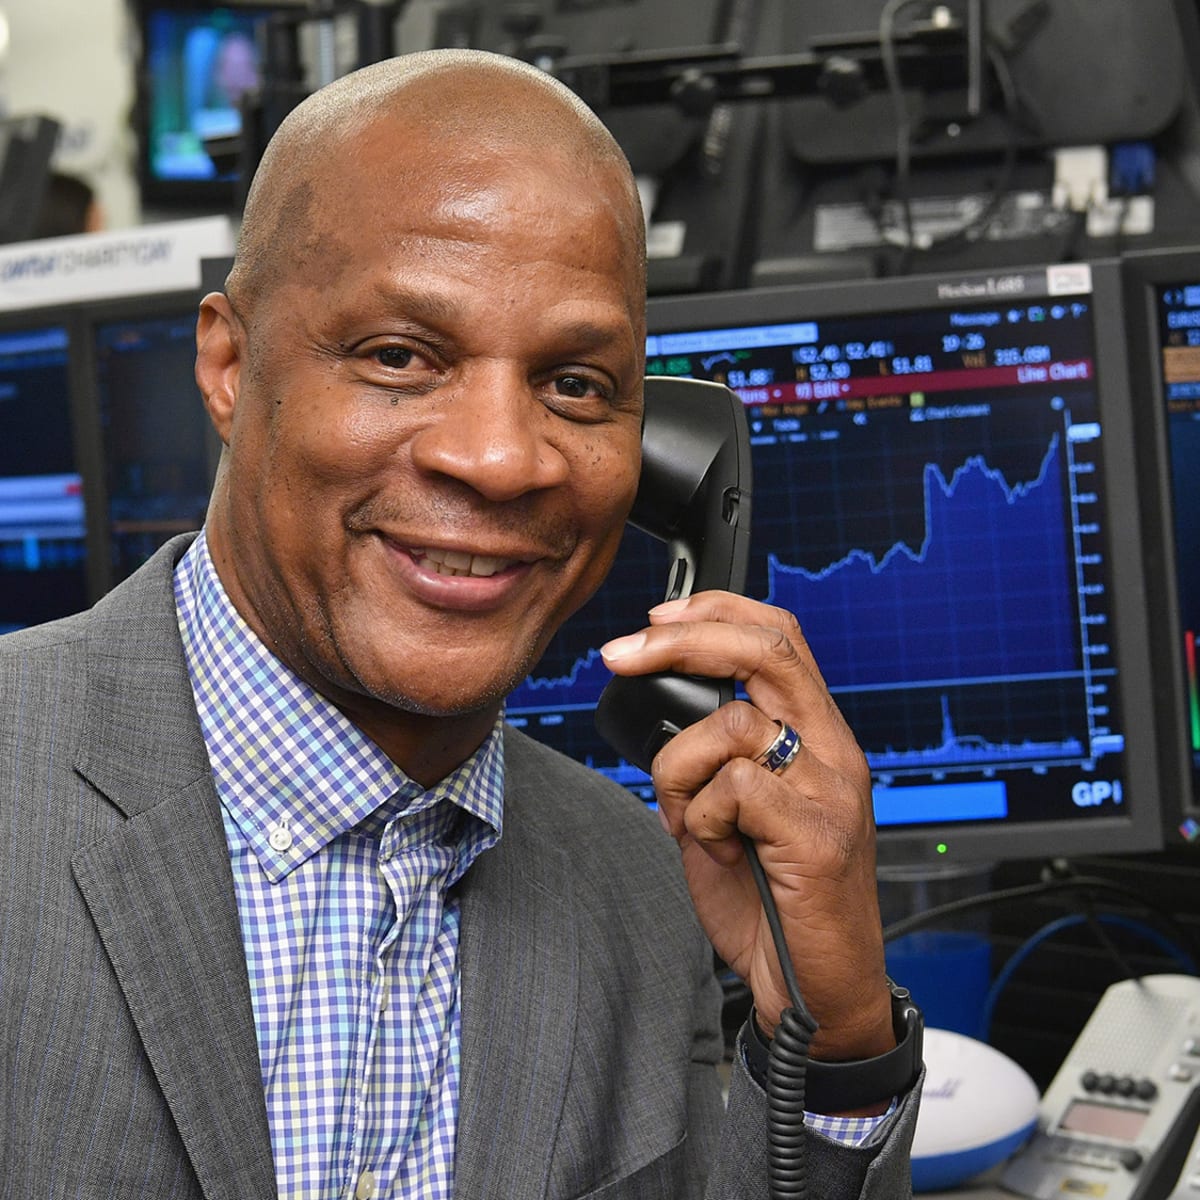 Darryl Strawberry says he used to have sex between innings